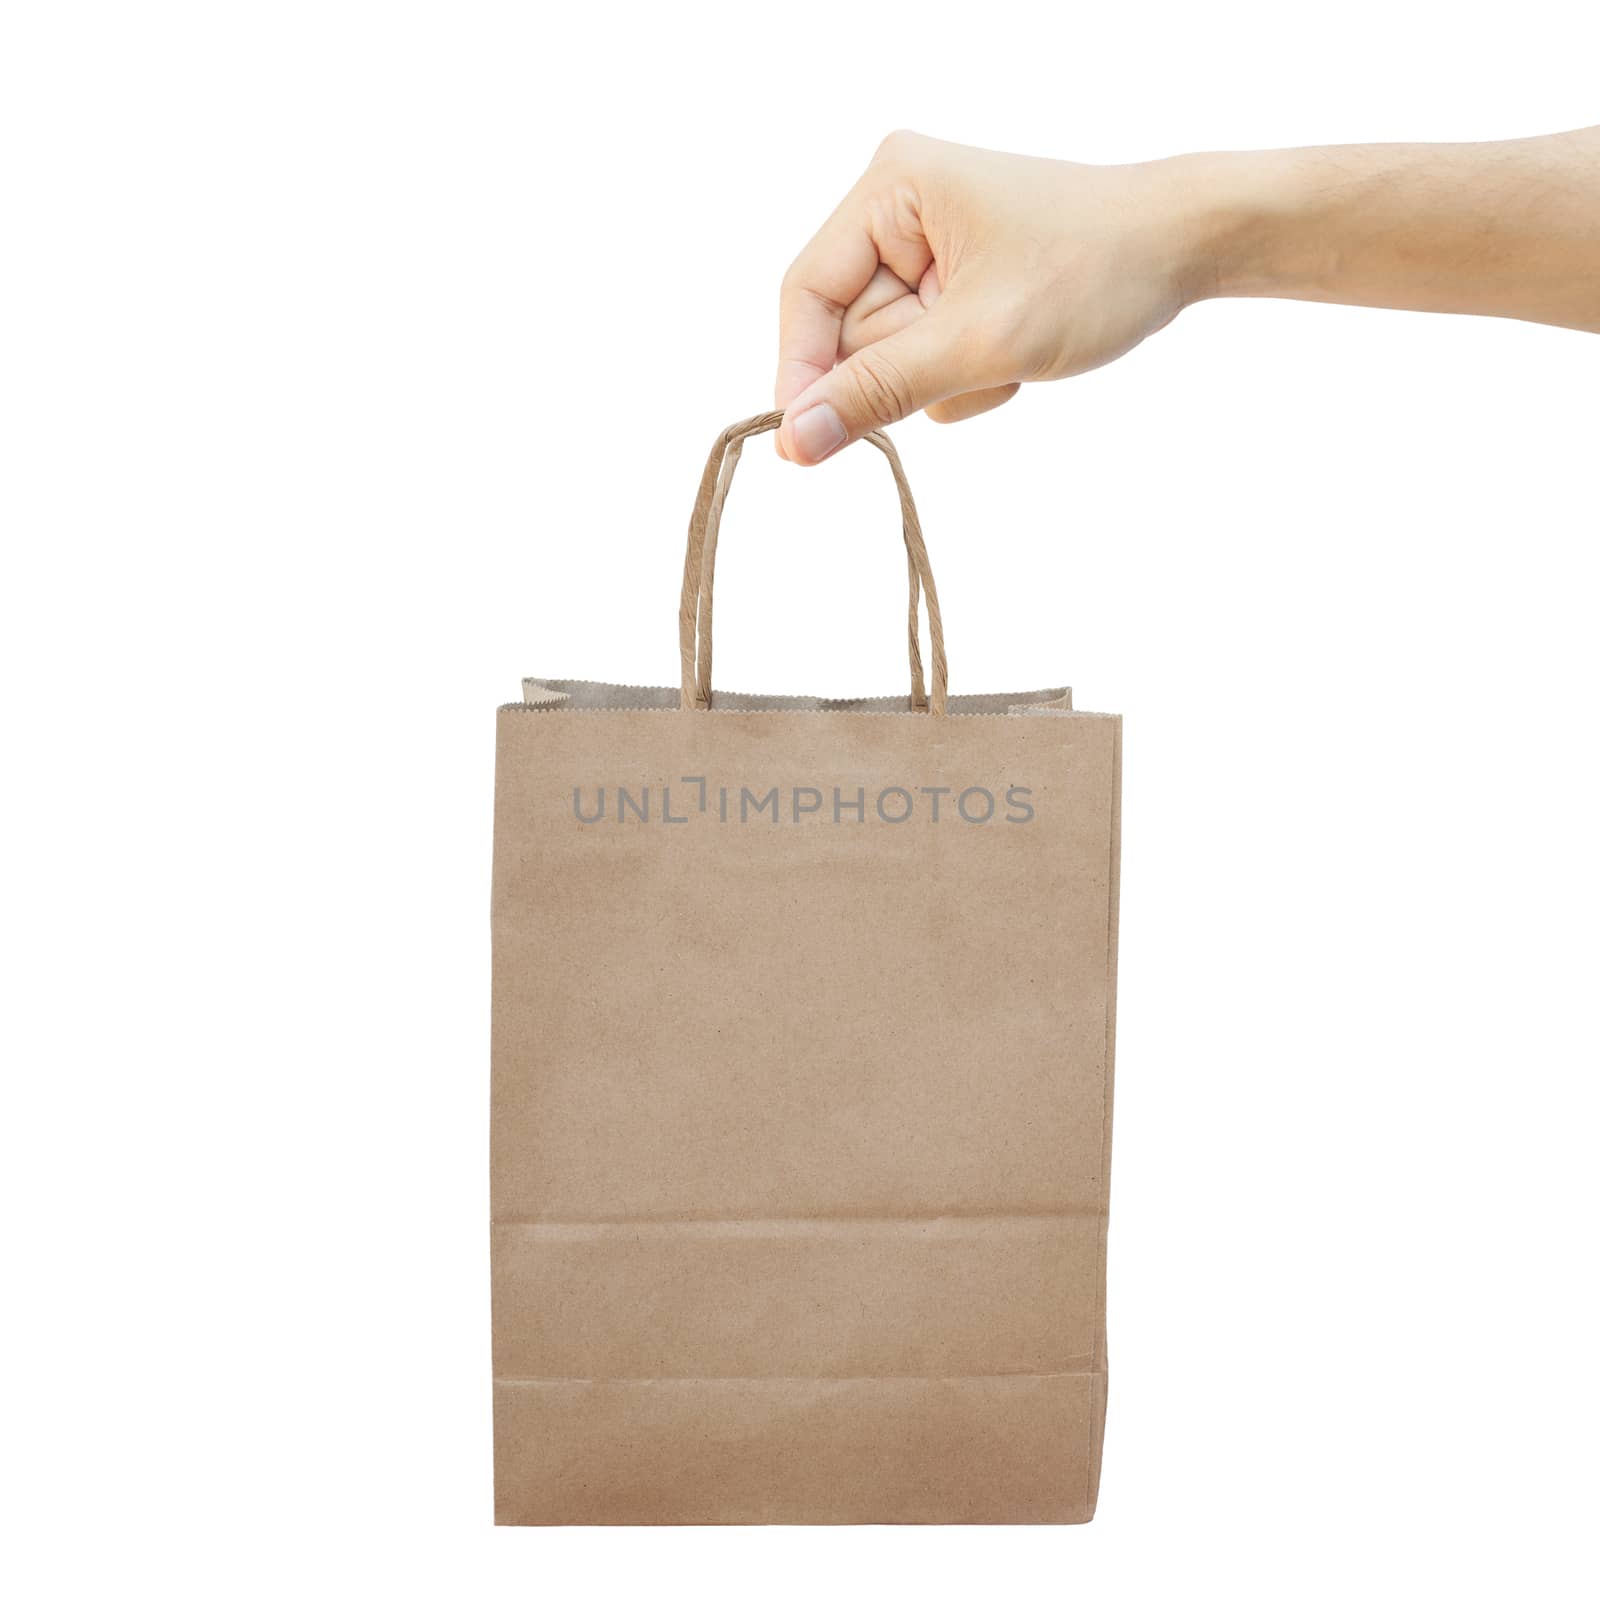 Hand With Paper Shopping Bag Isolated On White